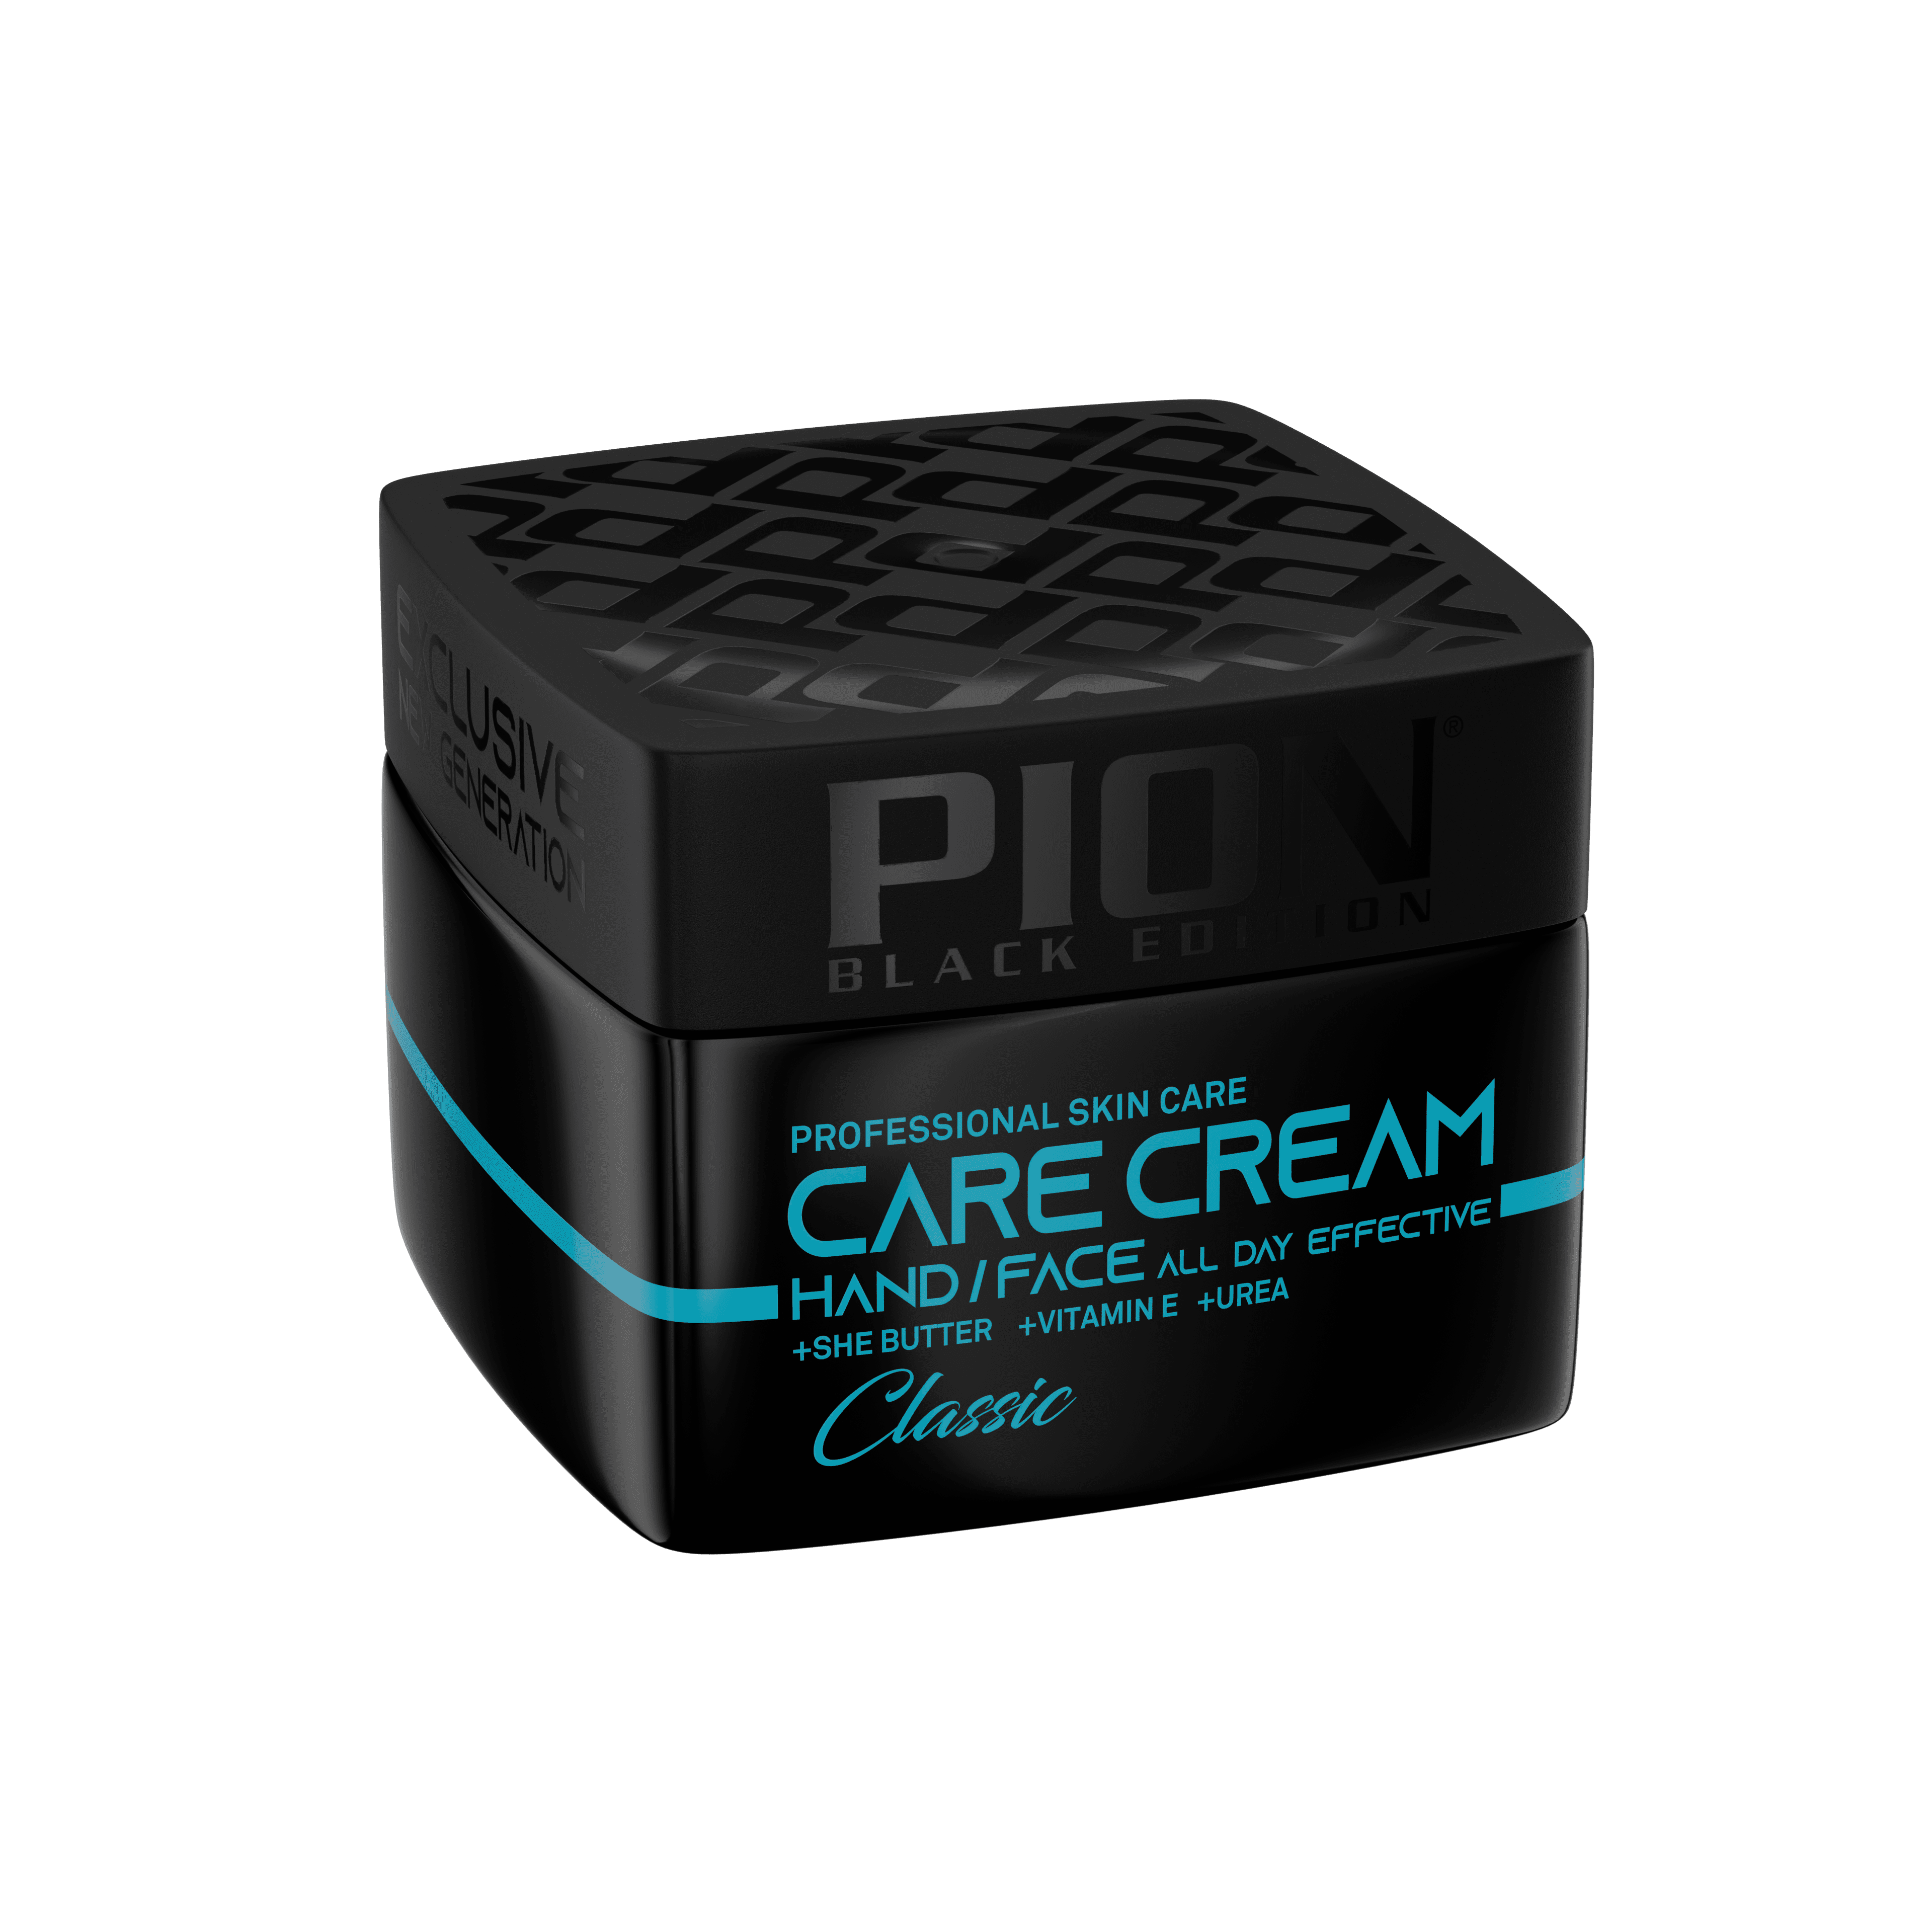 Pion Care Crame Hand & Face 240 ml - PION BLACK EDITION